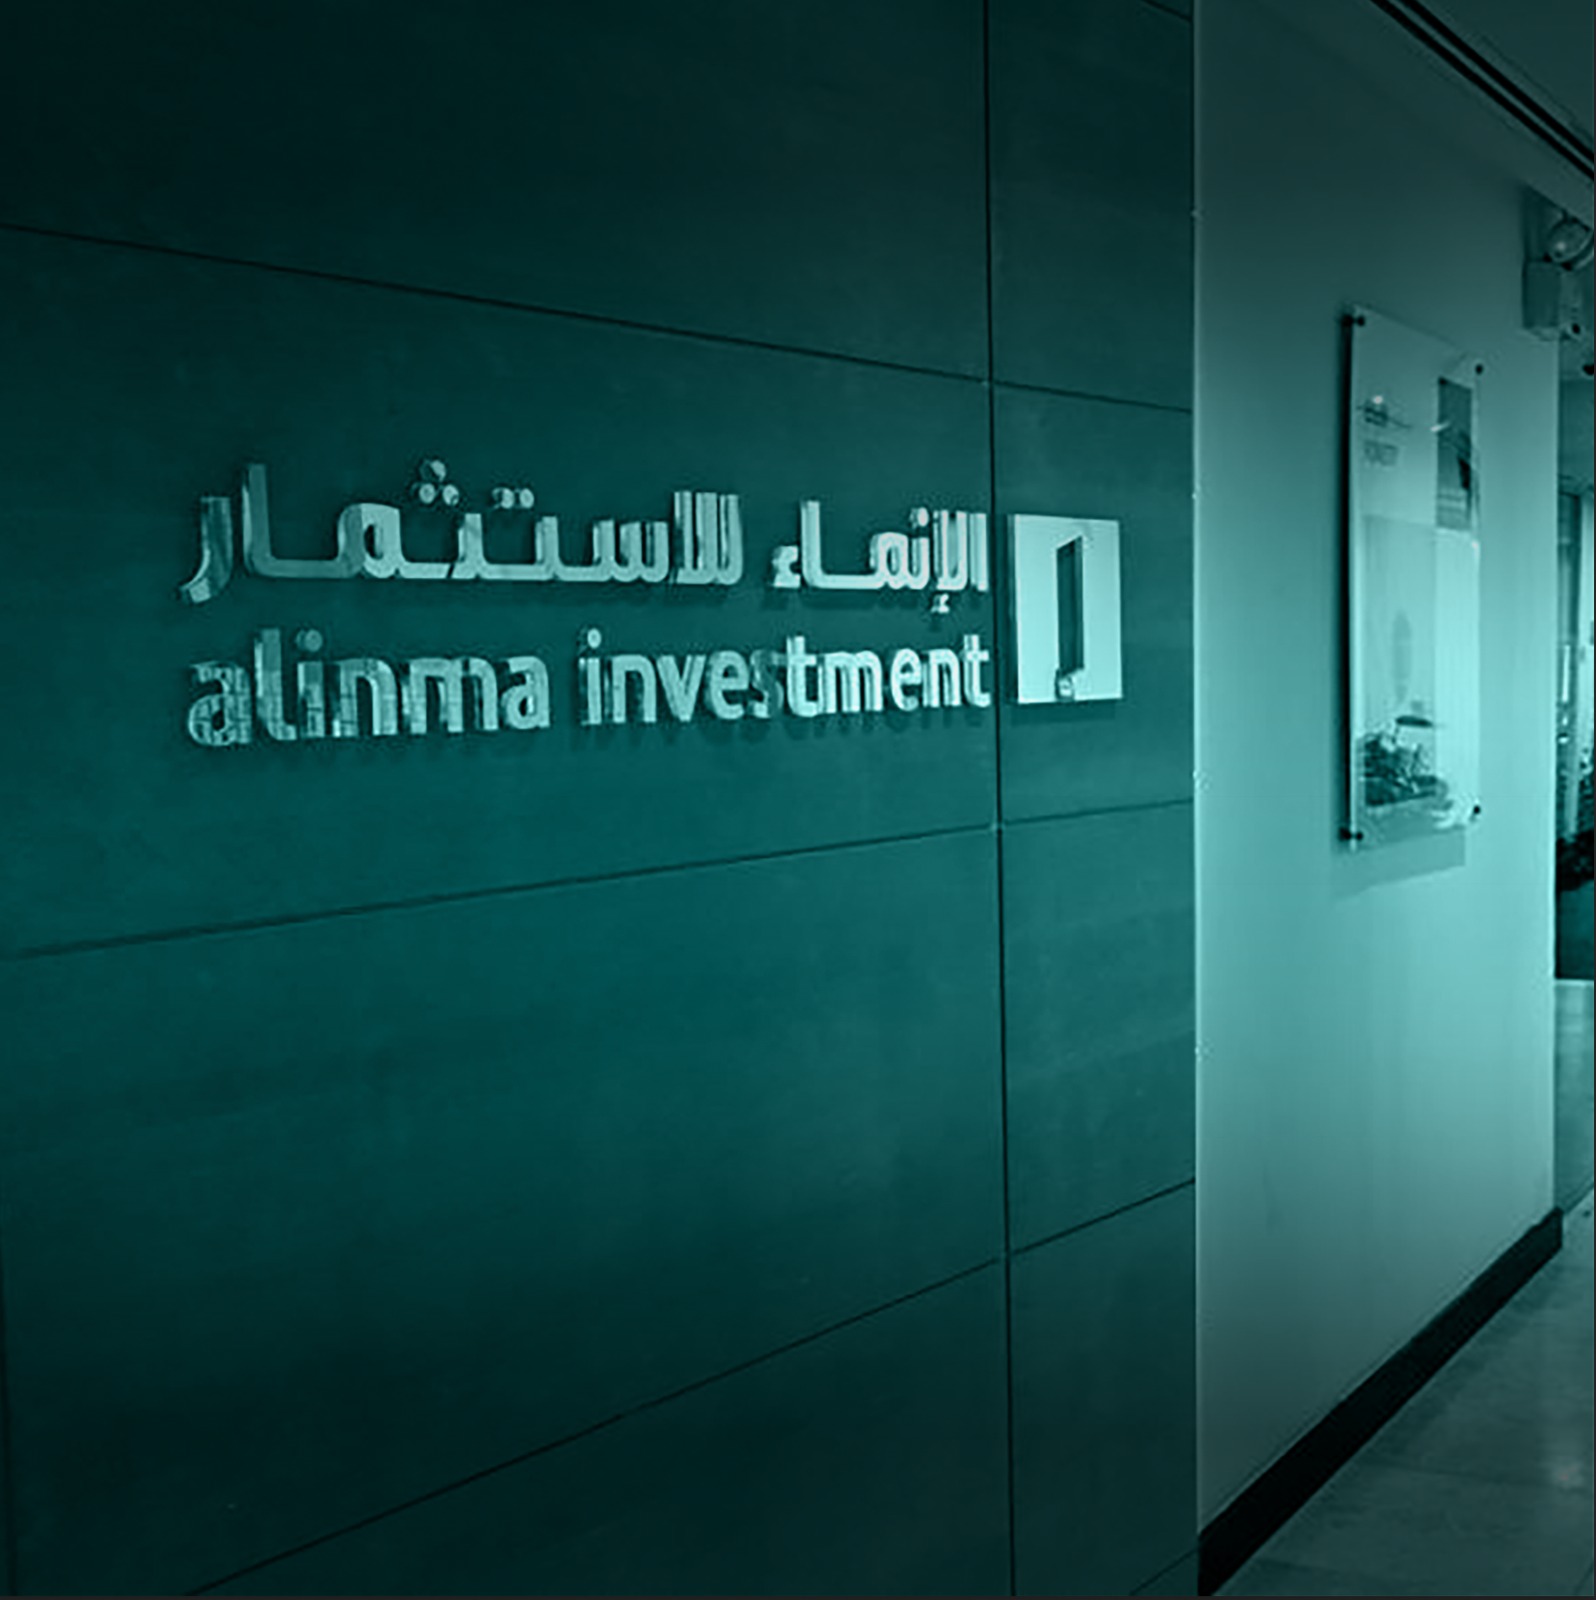 Alinma Investment Company Announces the Results of the Offering Process for the Initial Public Offering of Ghida Al-Sultan Company on the Parallel Market “Nomu”